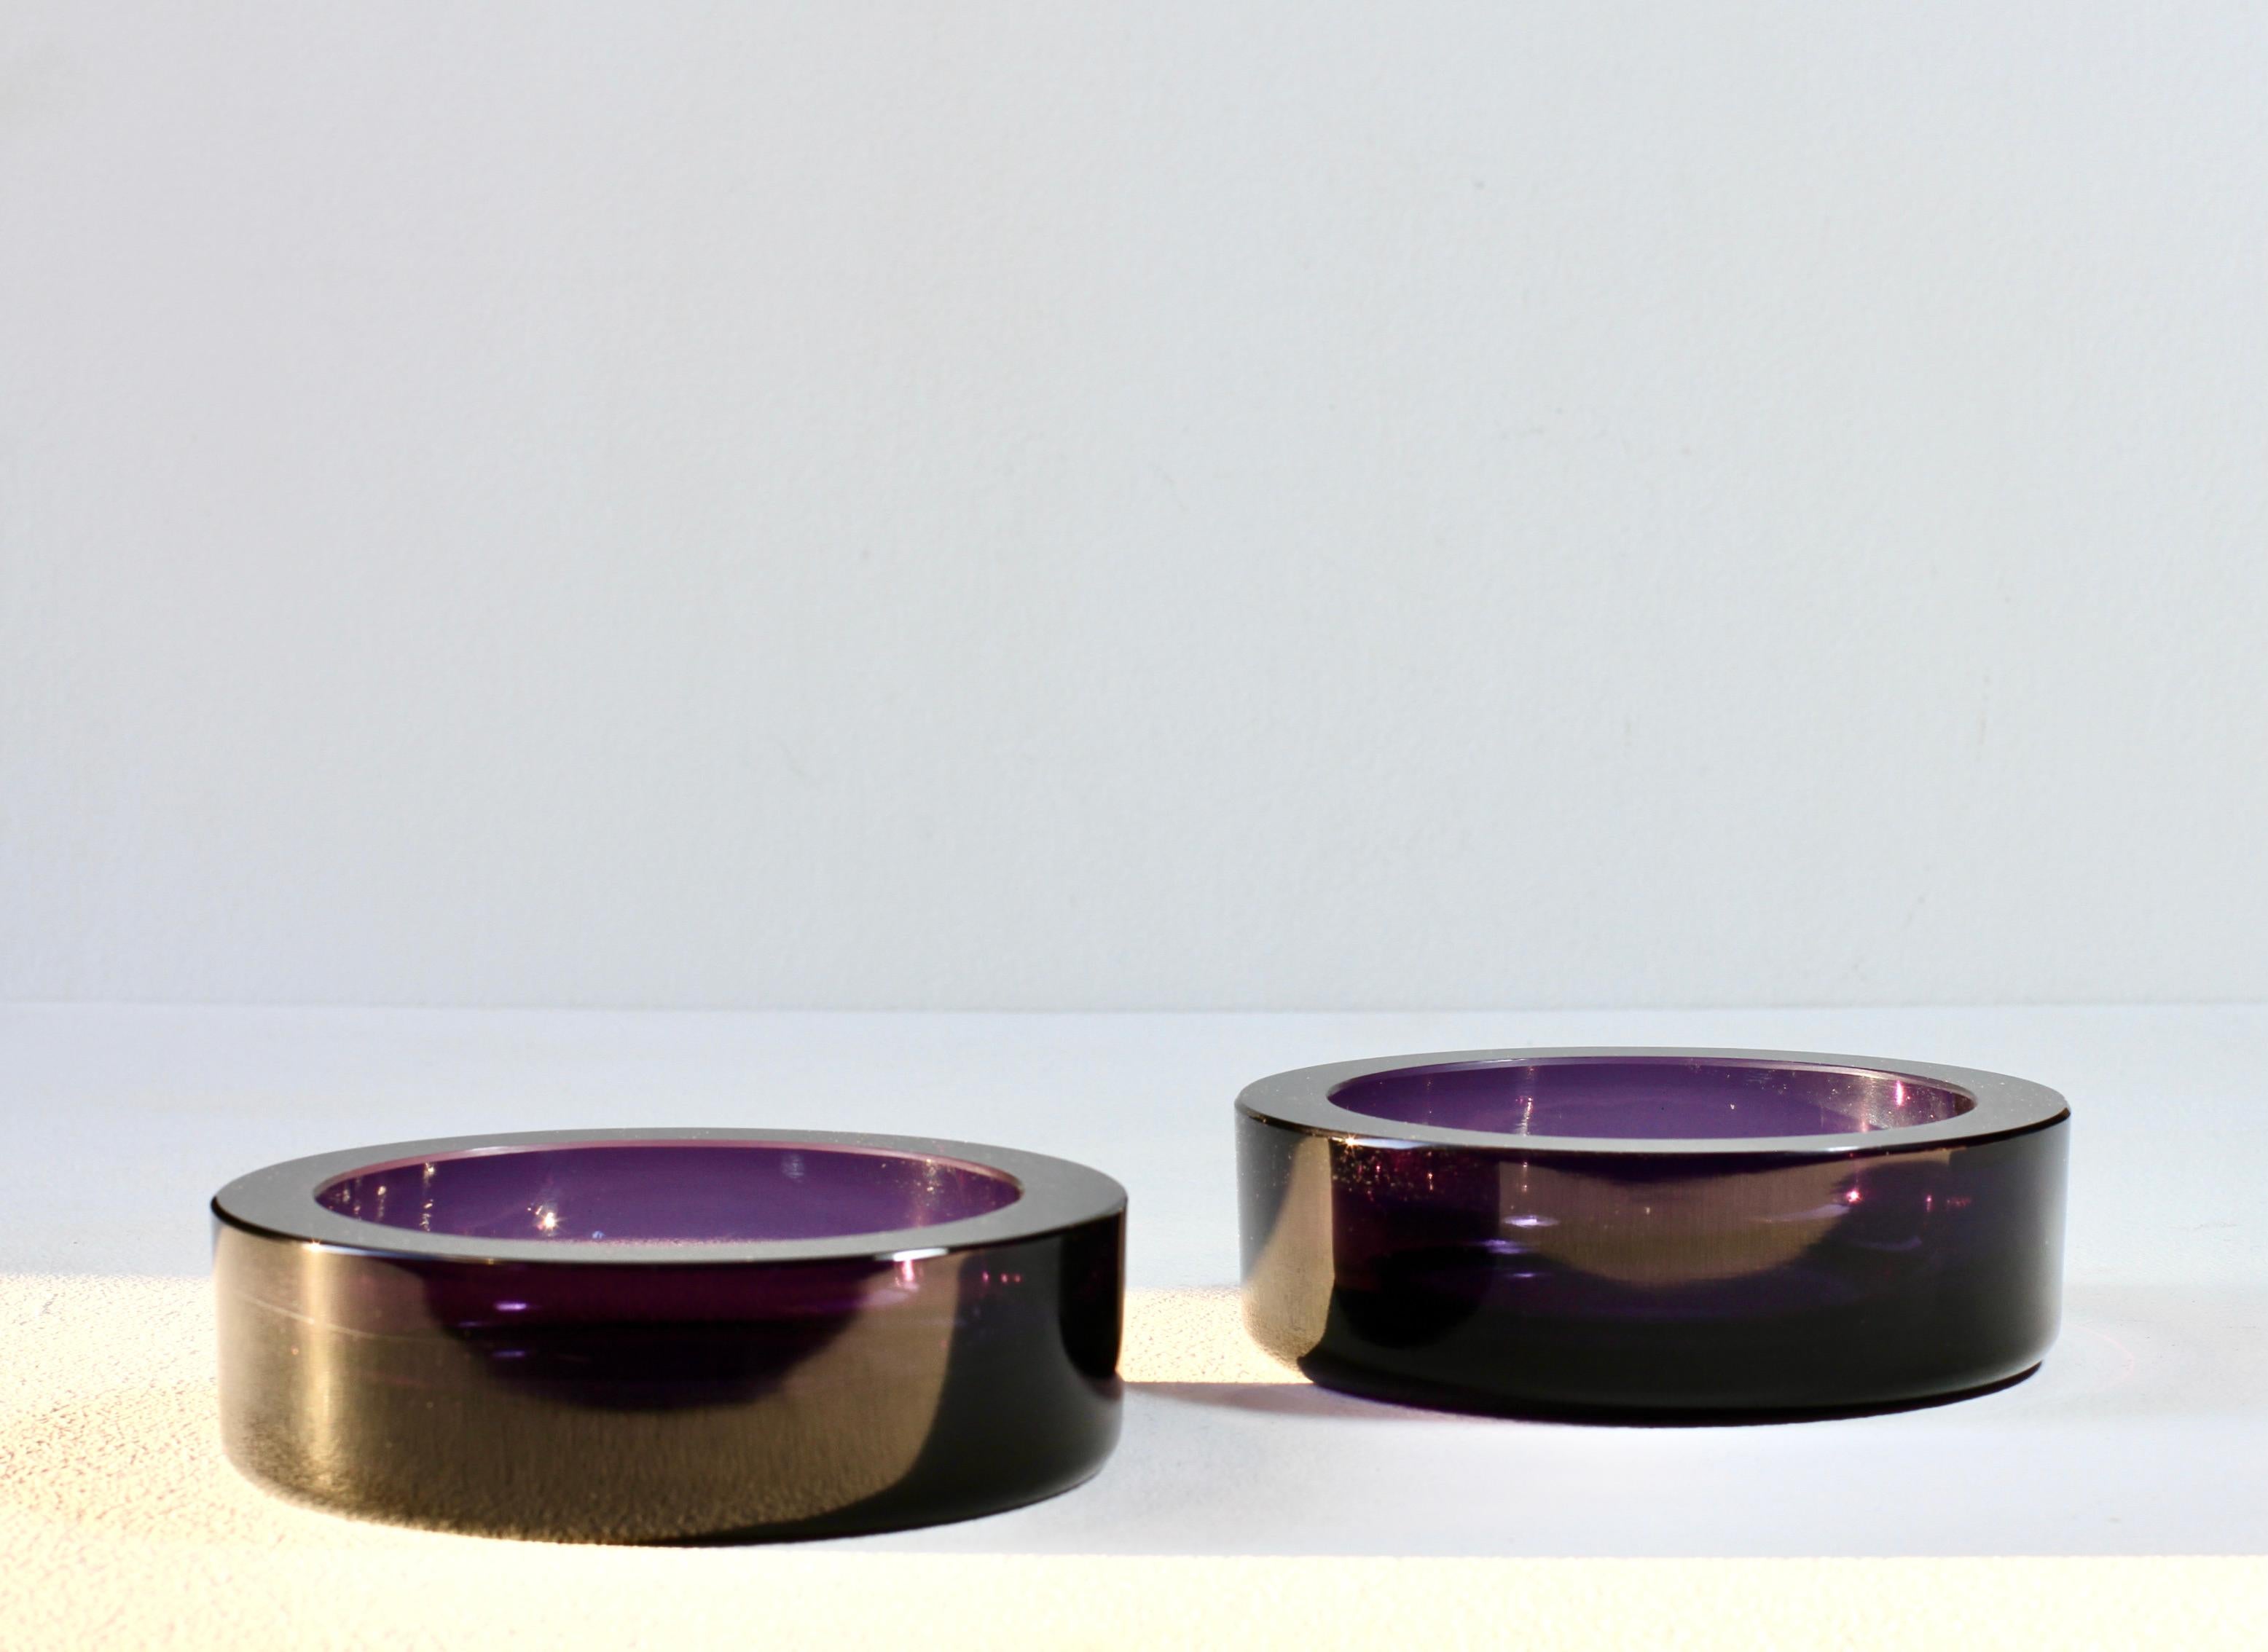 Rare pair of Venetian Mid-Century vintage modern Murano purple colored / coloured glass round circular dishes, bowls or ashtrays. Wonderful vintage Mid-Century Italian glass and perfect for serving sweets or snacks in the kitchen, lounge. or dining